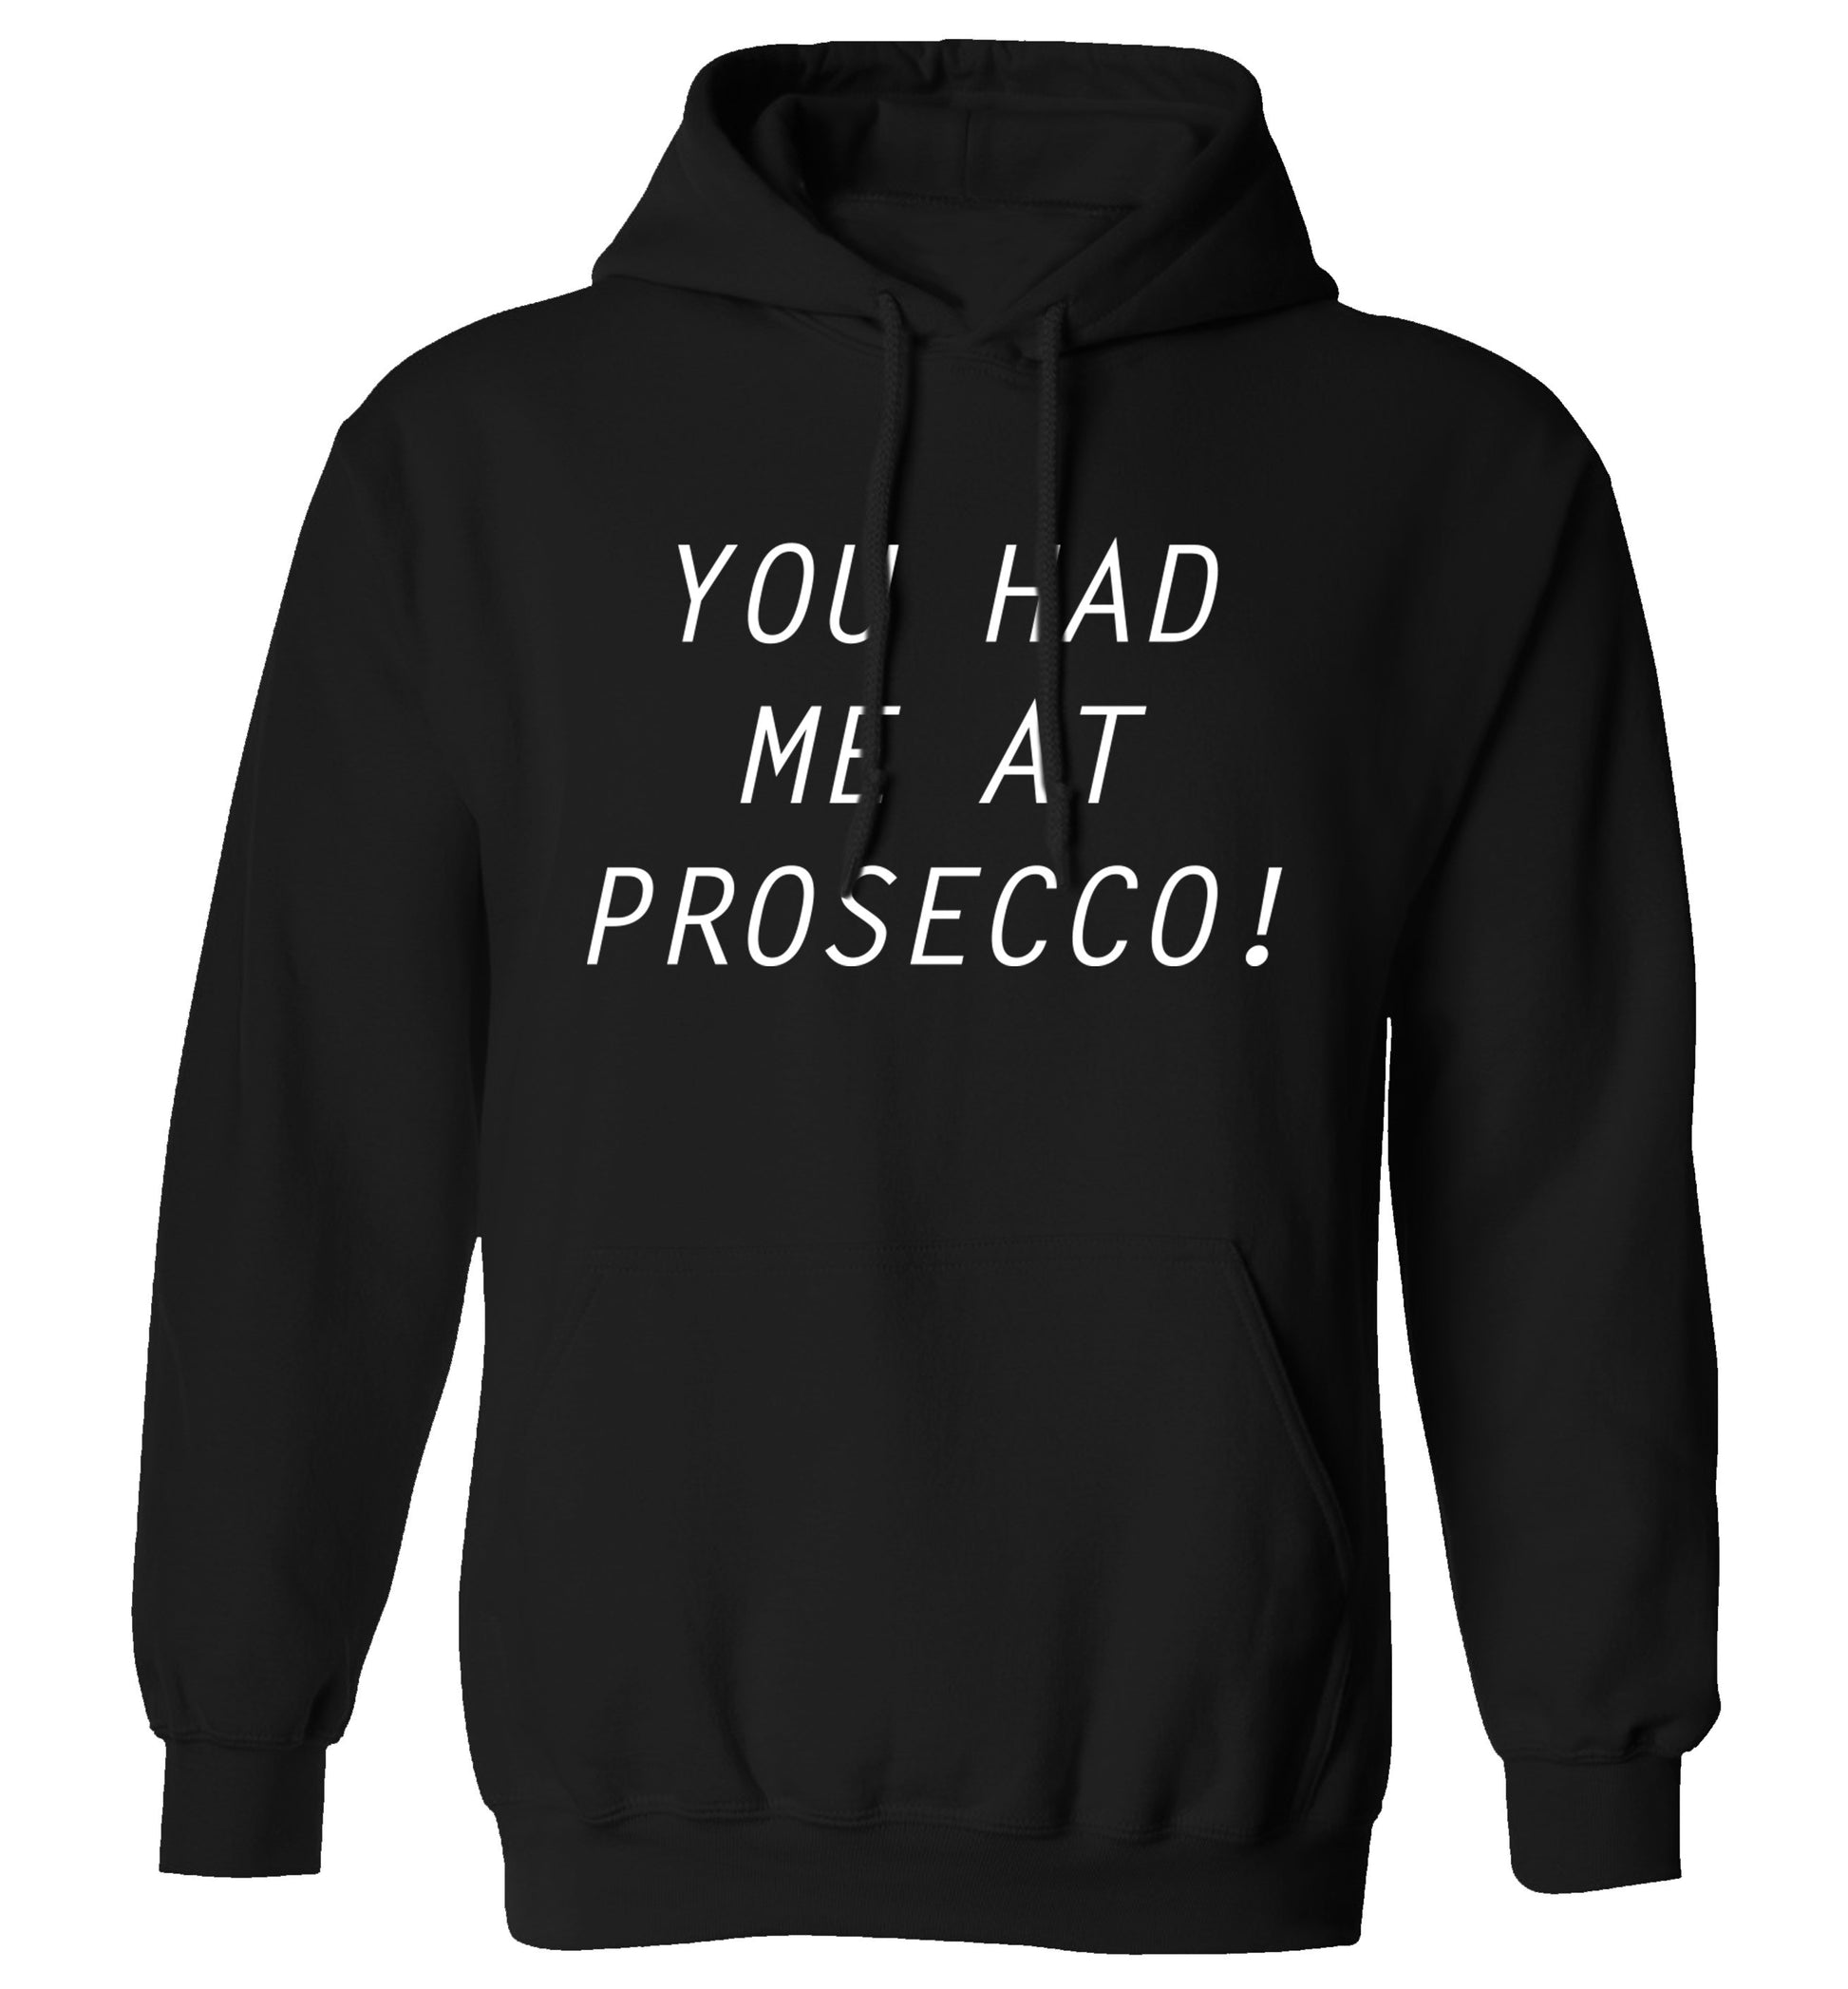 You had me at prosecco adults unisex black hoodie 2XL